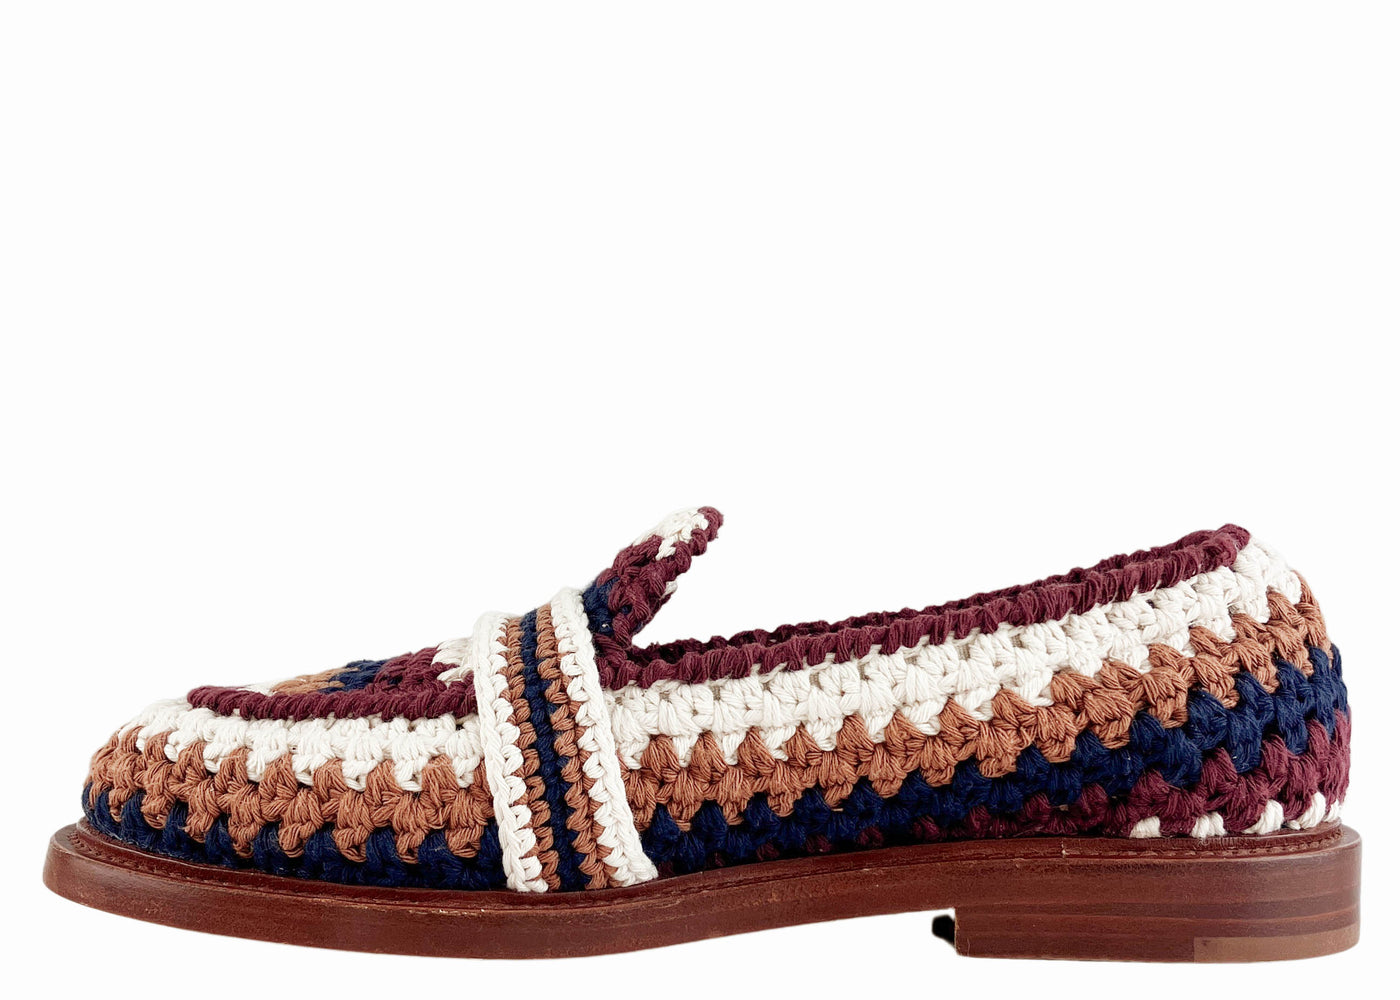 Chloé Kayla Loafer in Multi Blue - Discounts on Chloé at UAL